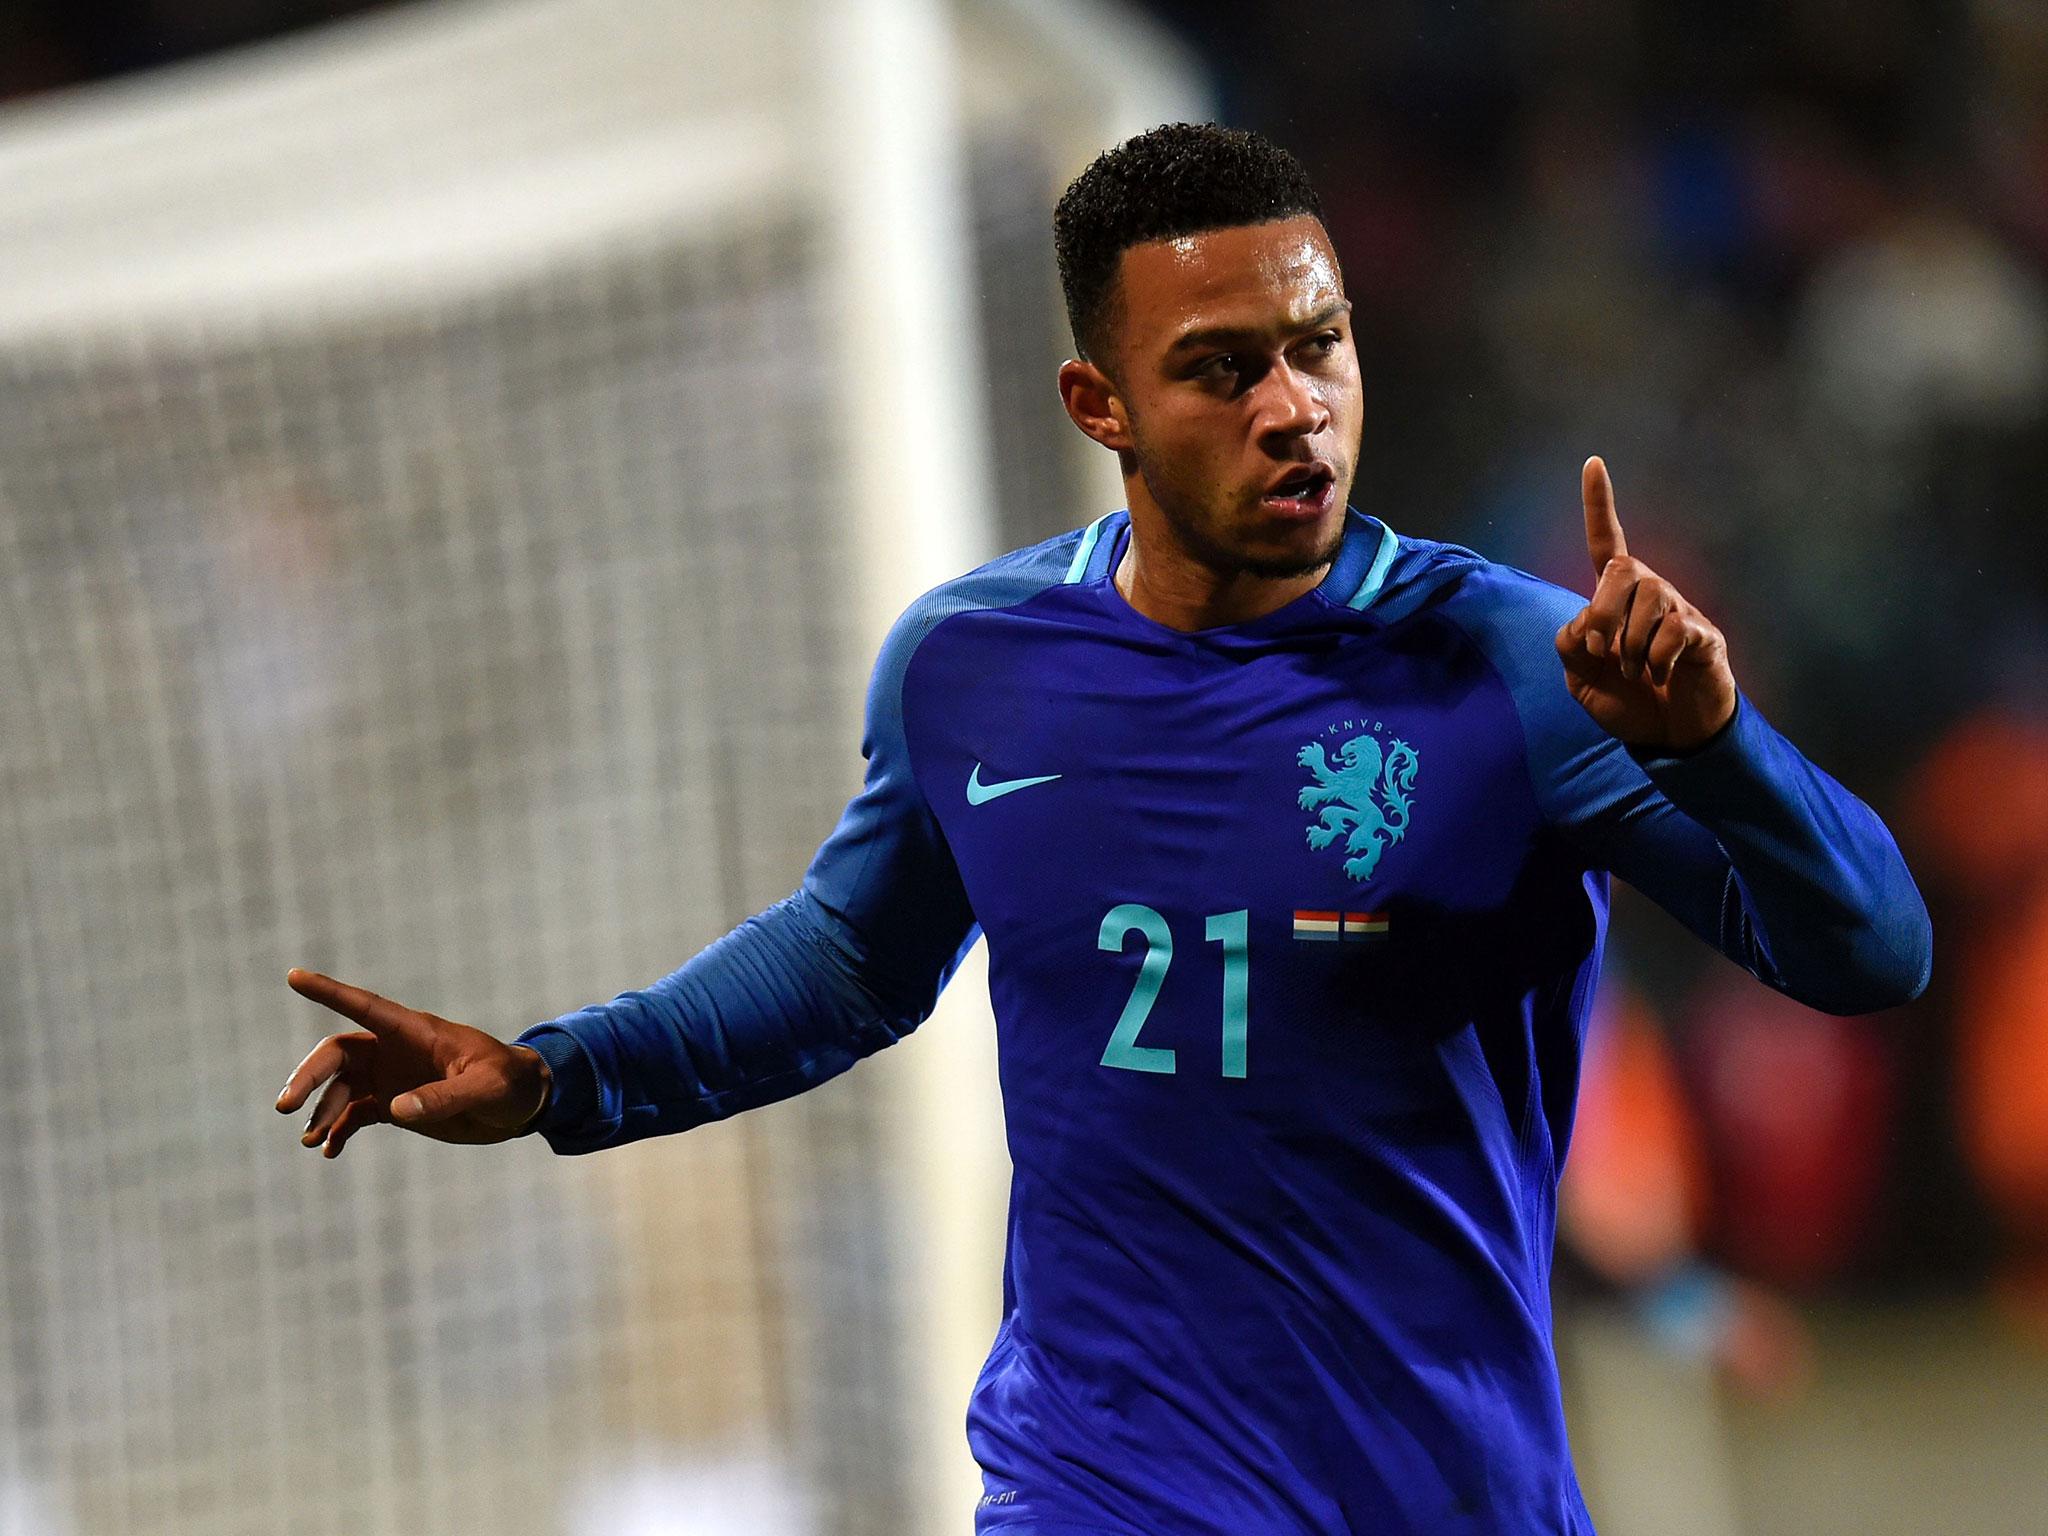 Depay bagged a brace for Netherlands in their recent 3-1 victory against Luxembourg